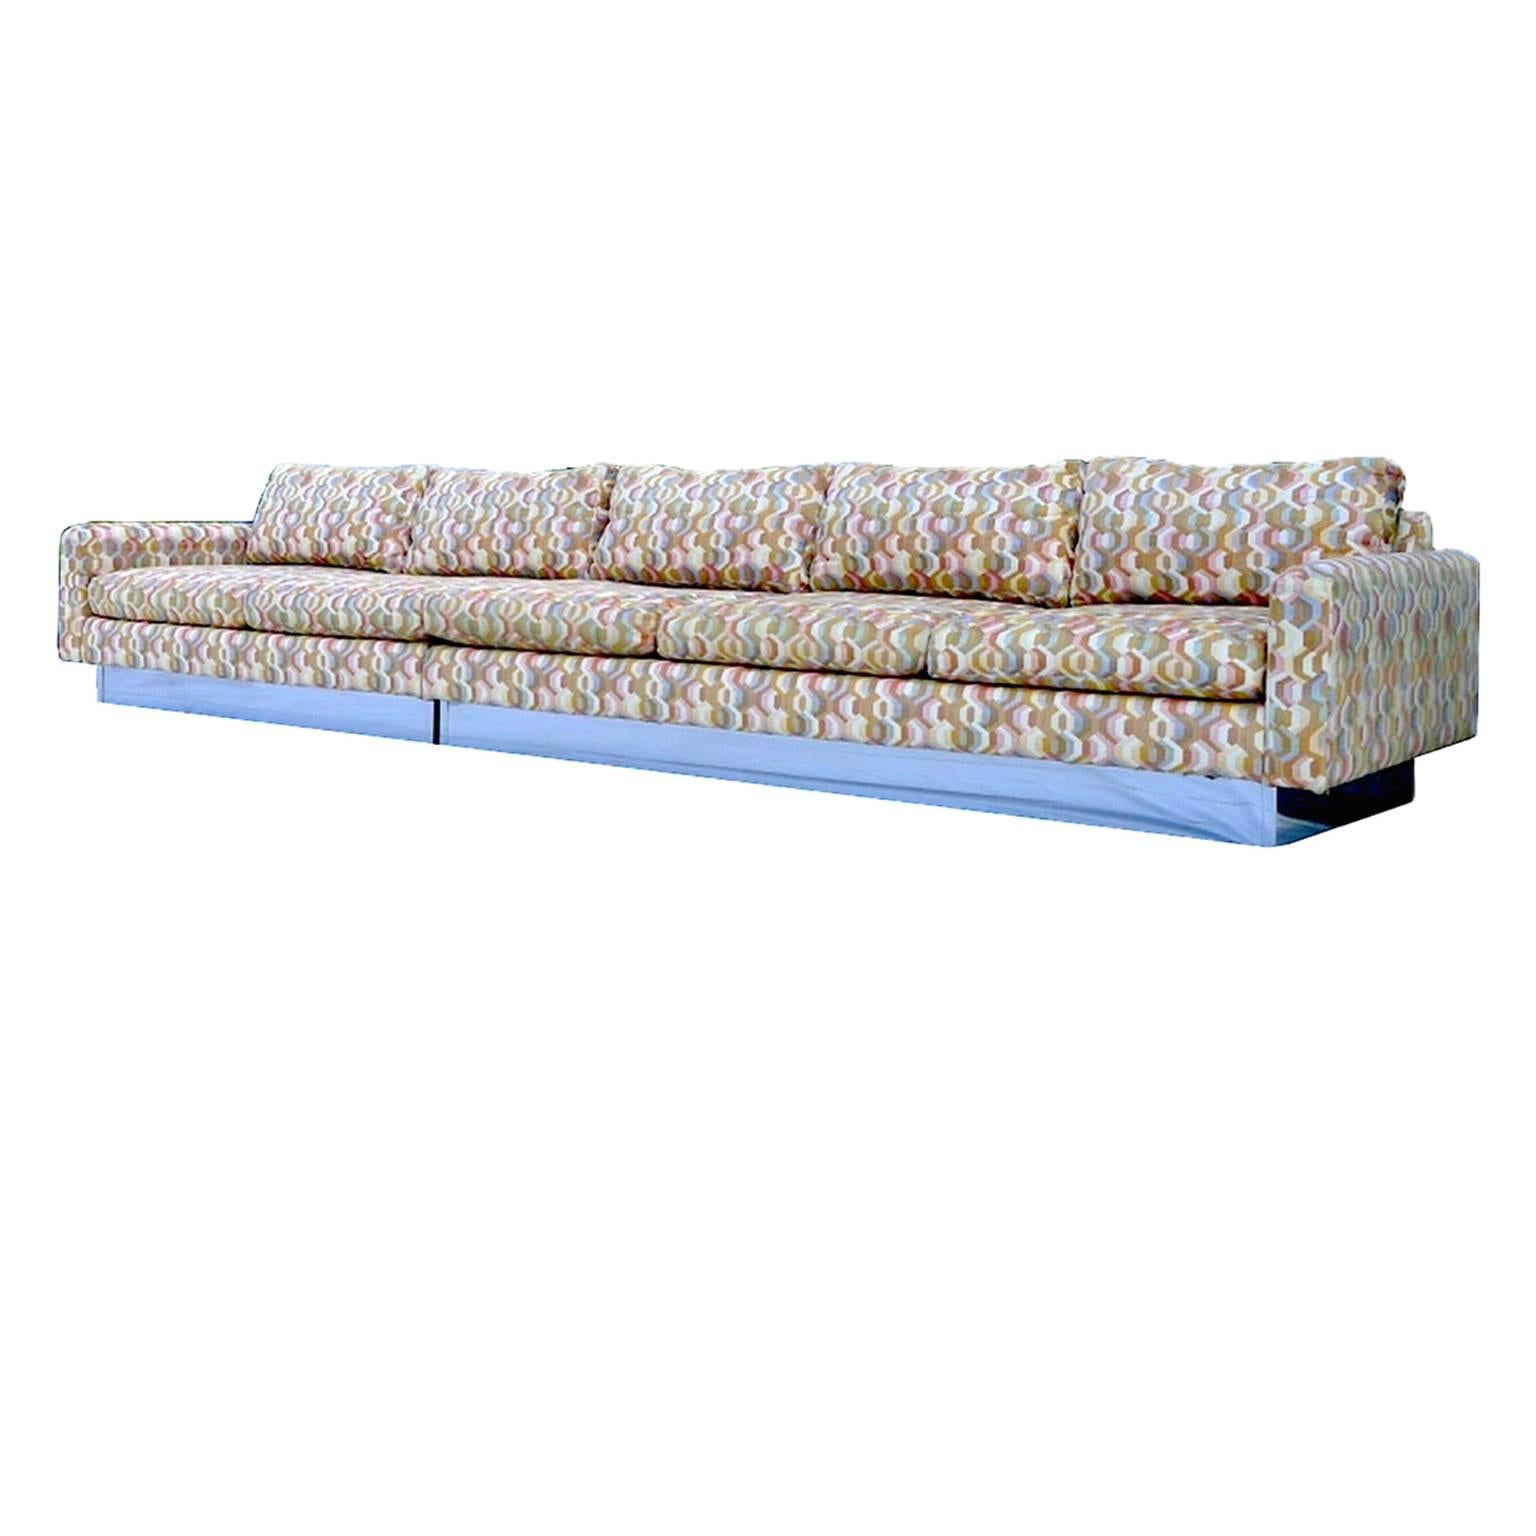 

**this listing includes the following pieces:
Three cushion section: 86" L x 35" D x 23.5" H. 
Two cushion section: 59" L x 35" D x 23.5" H. 
Corner piece: 34" L x 34" D x 23.5" H.
ottoman: 15 in.Hx34